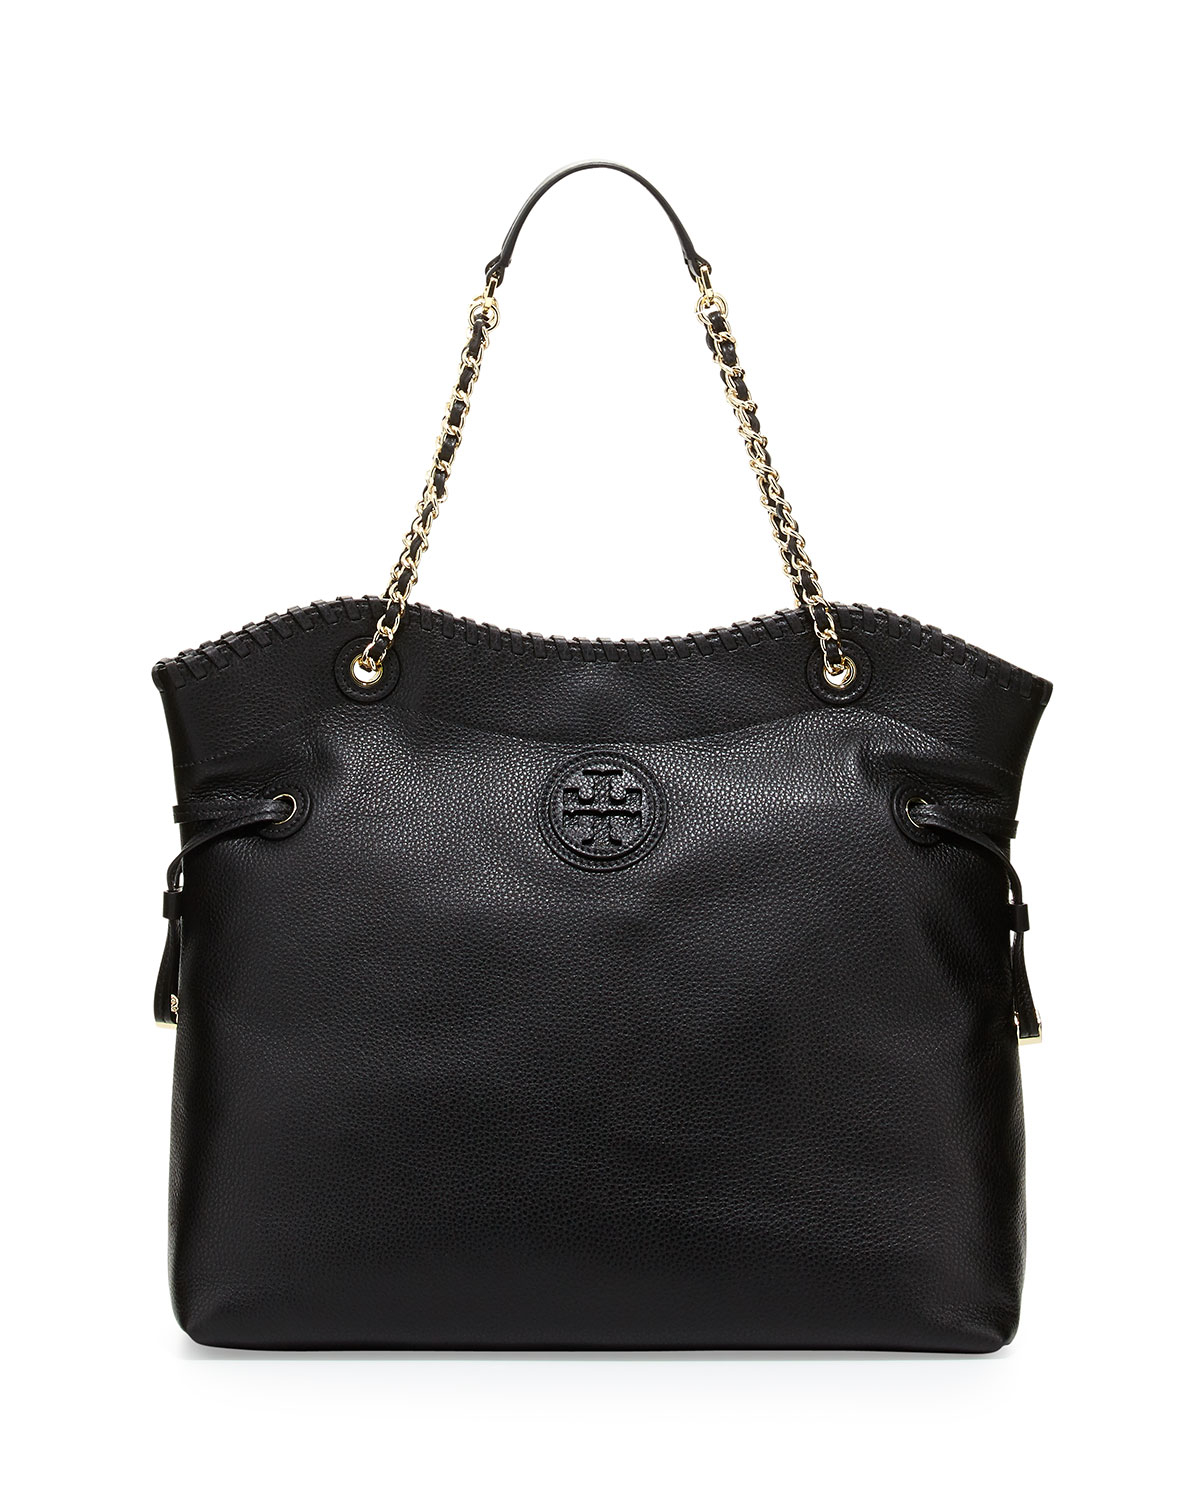 Tory Burch Marion Slouchy Drawstring Tote Bag in Black | Lyst